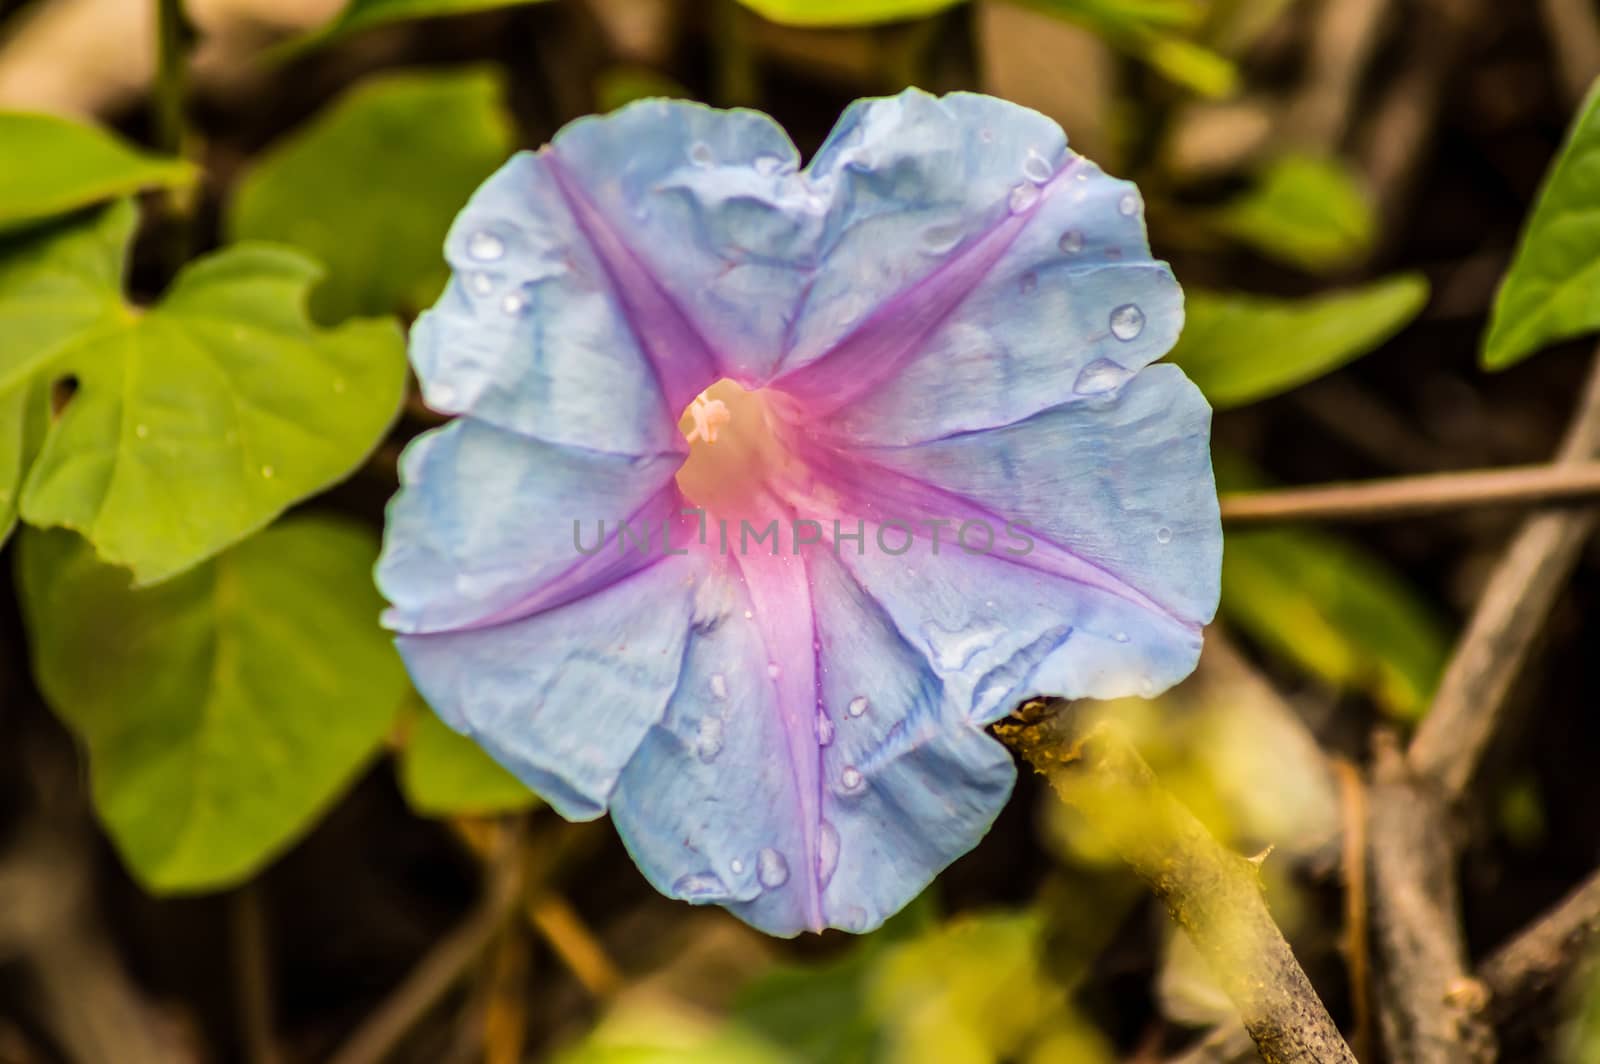 Ipomoea alba, also called moon flower due to its nocturnal flowering, is a species of plant in the Convolvulaceae family. photo in a garden in Nairobi Kenya